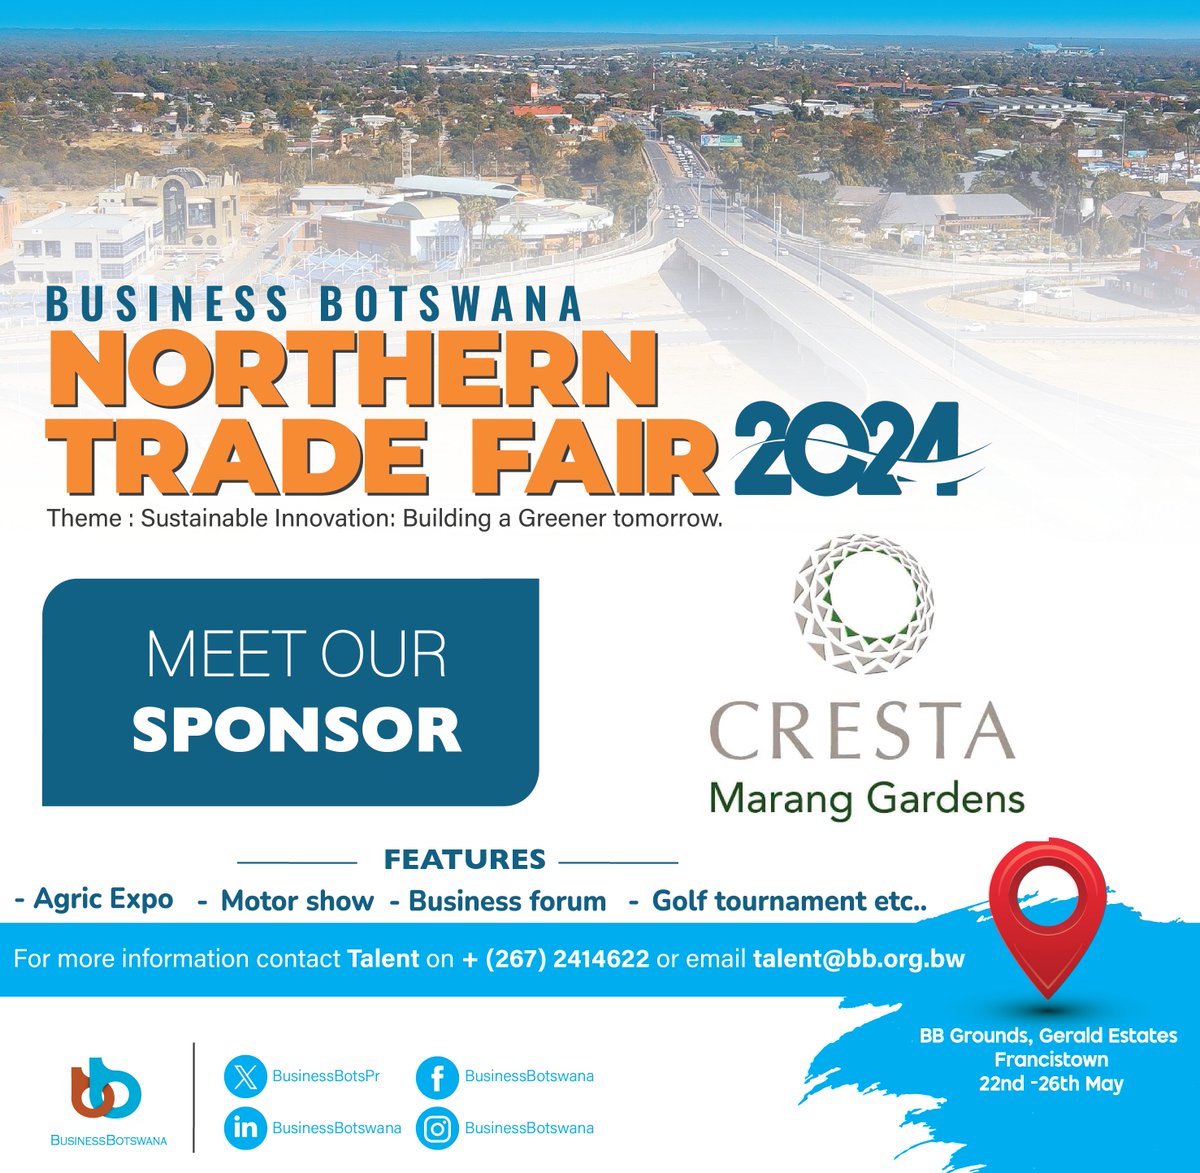 Meet our sponsor for the #28th Northern Trade Fair, Cresta Marang hotel.

Less than a 10-minute drive from Francistown city centre, nestled along the banks of the Tati River, lies the delightful Cresta Marang Gardens hotel, ensuring a memorable  experience for every guest.